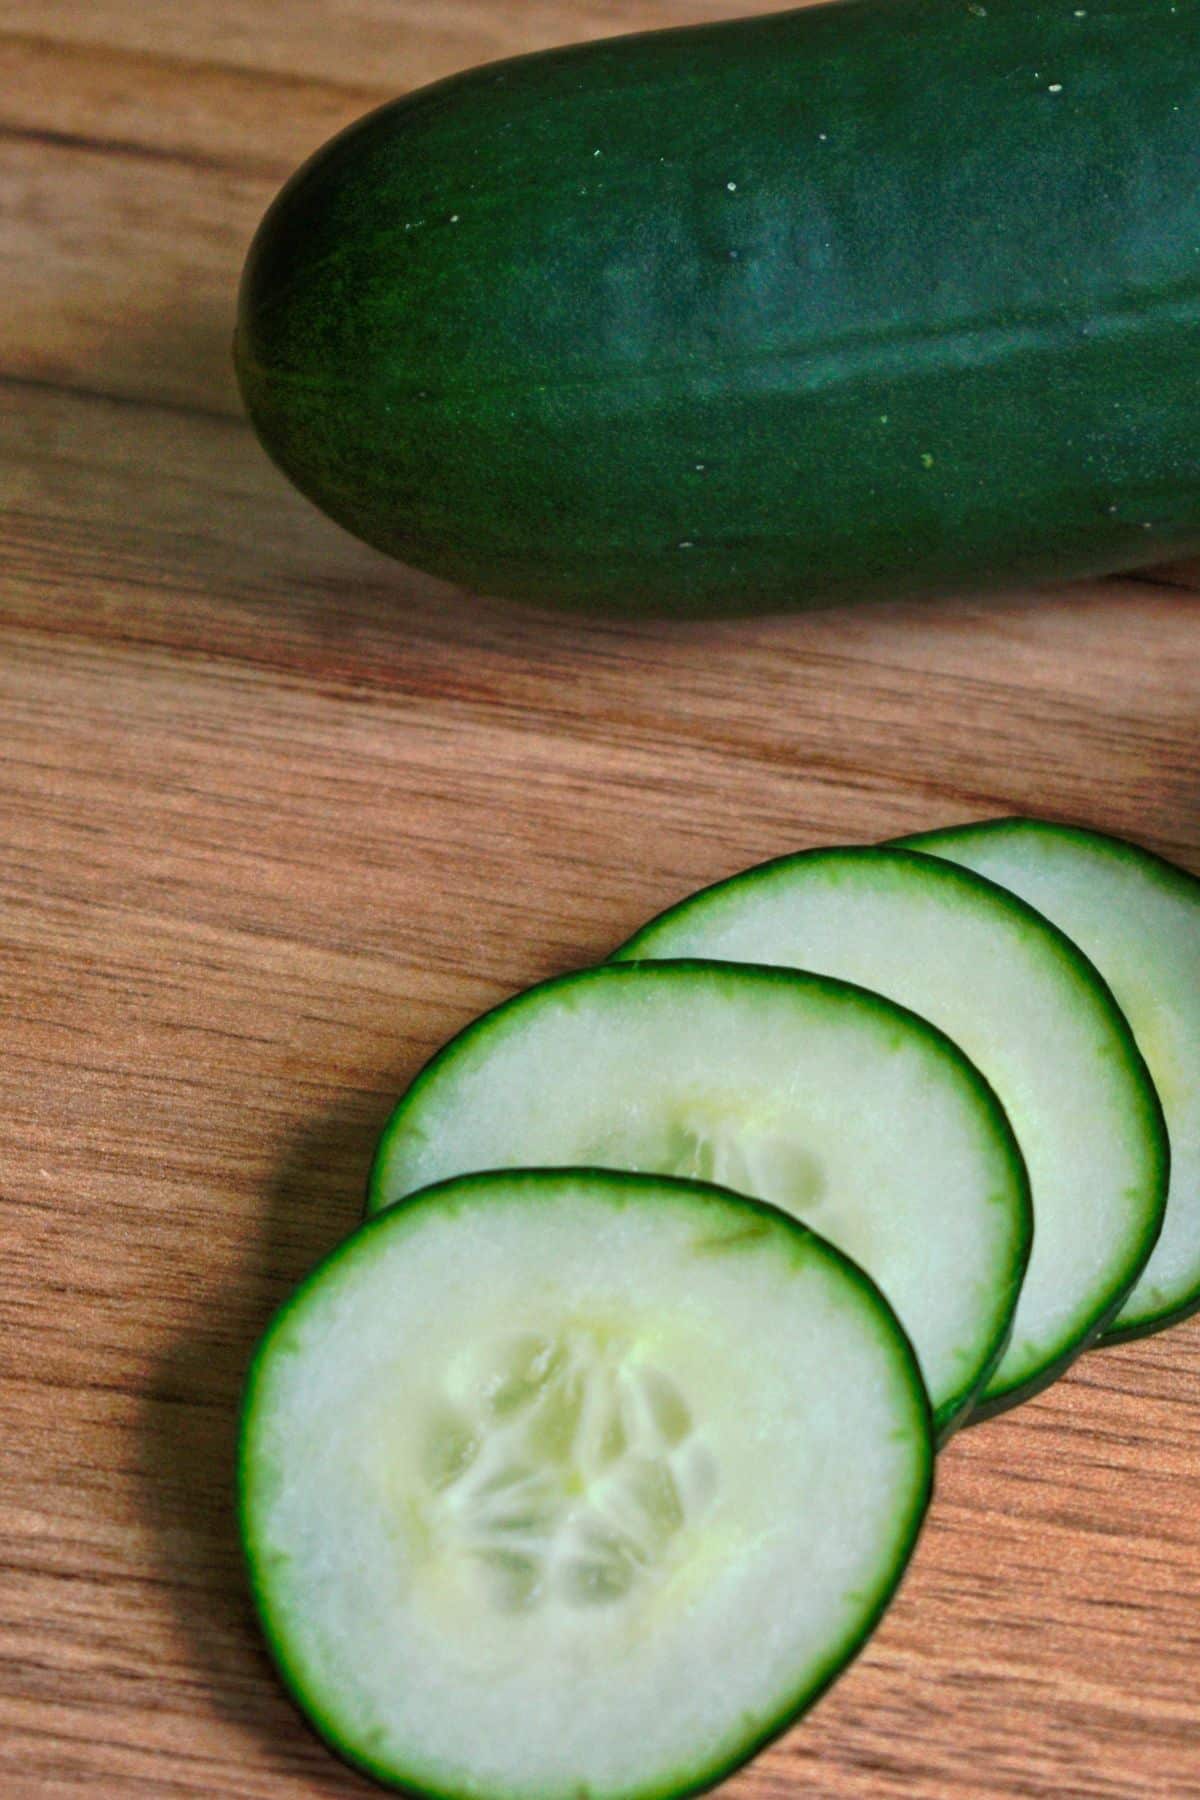 Cucumber slices on a wooden cutting board.